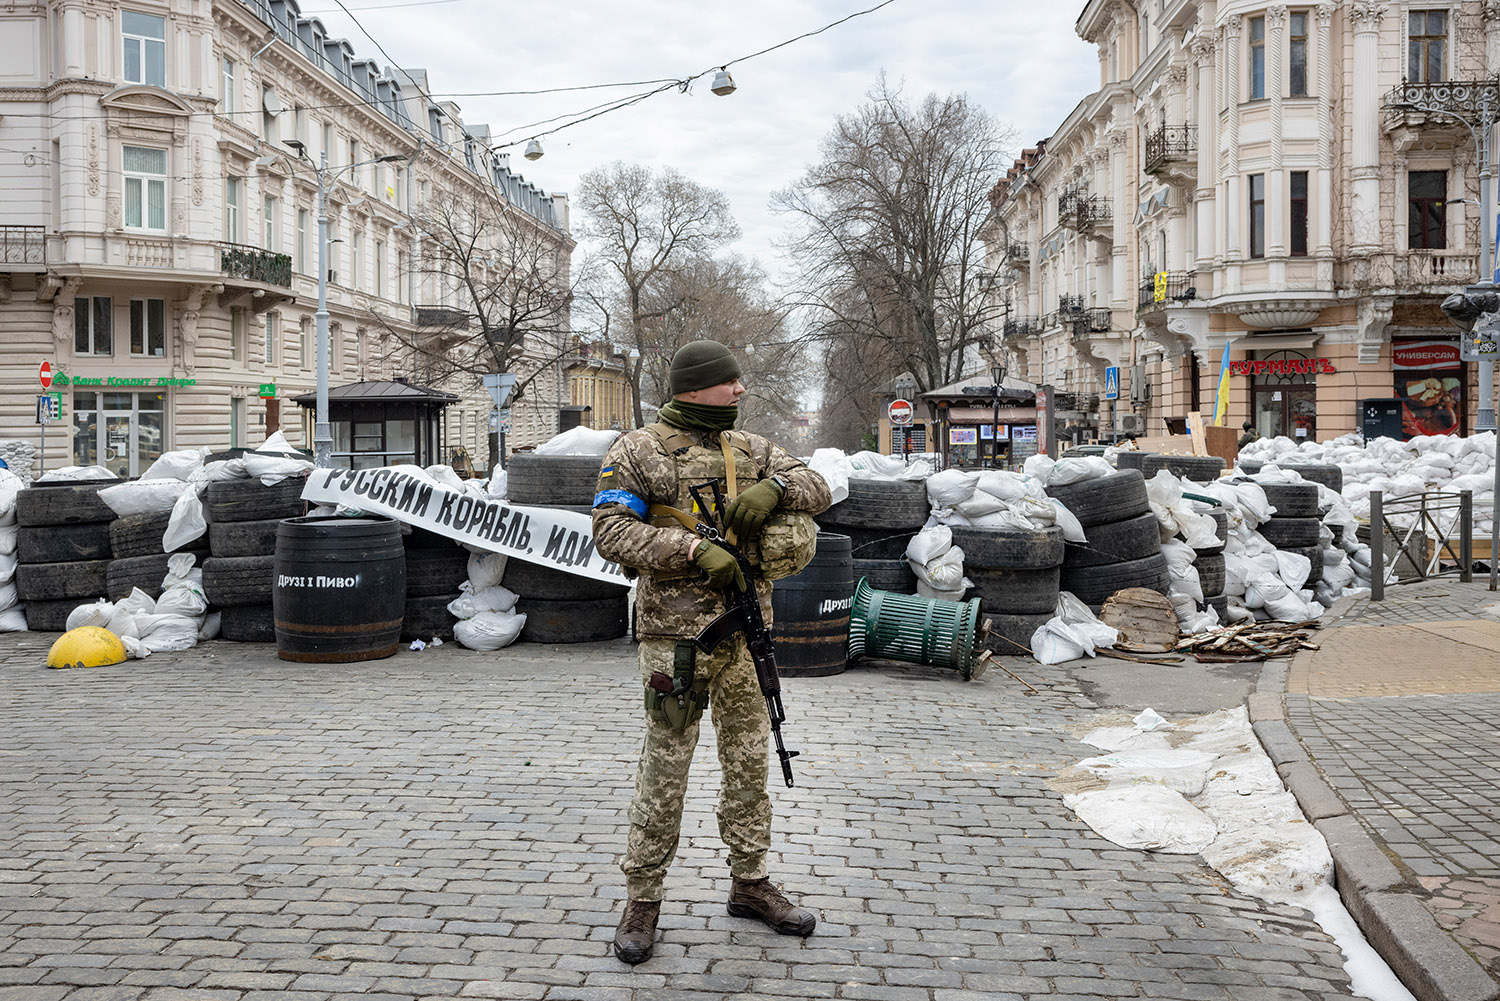 Ukrainian solider standing on a street lined with sandbags, tires, and barrels.